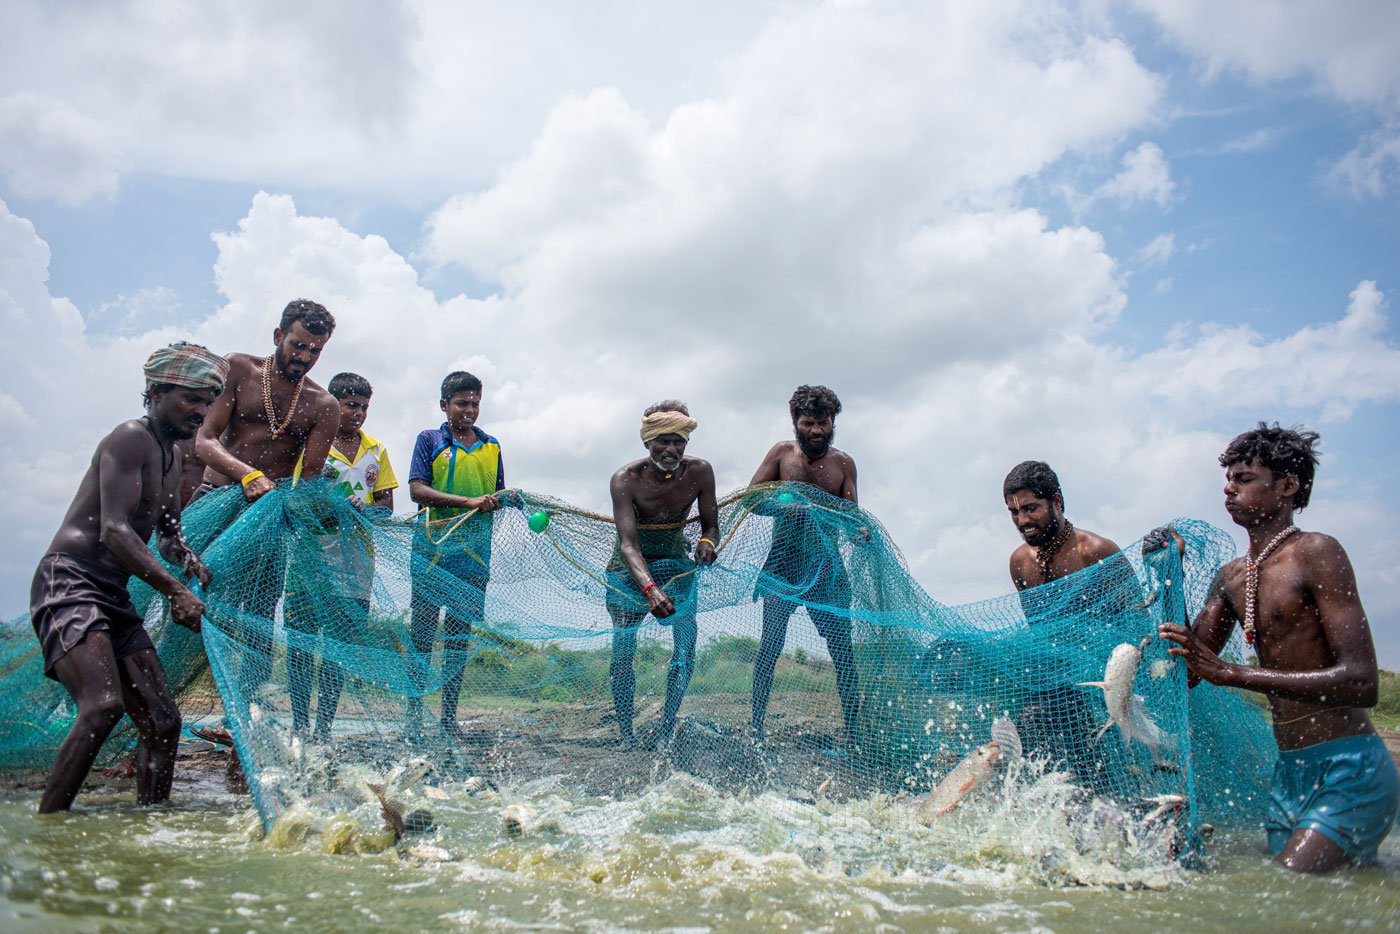 They drag the net towards the shore in the small lake in Kunnathur